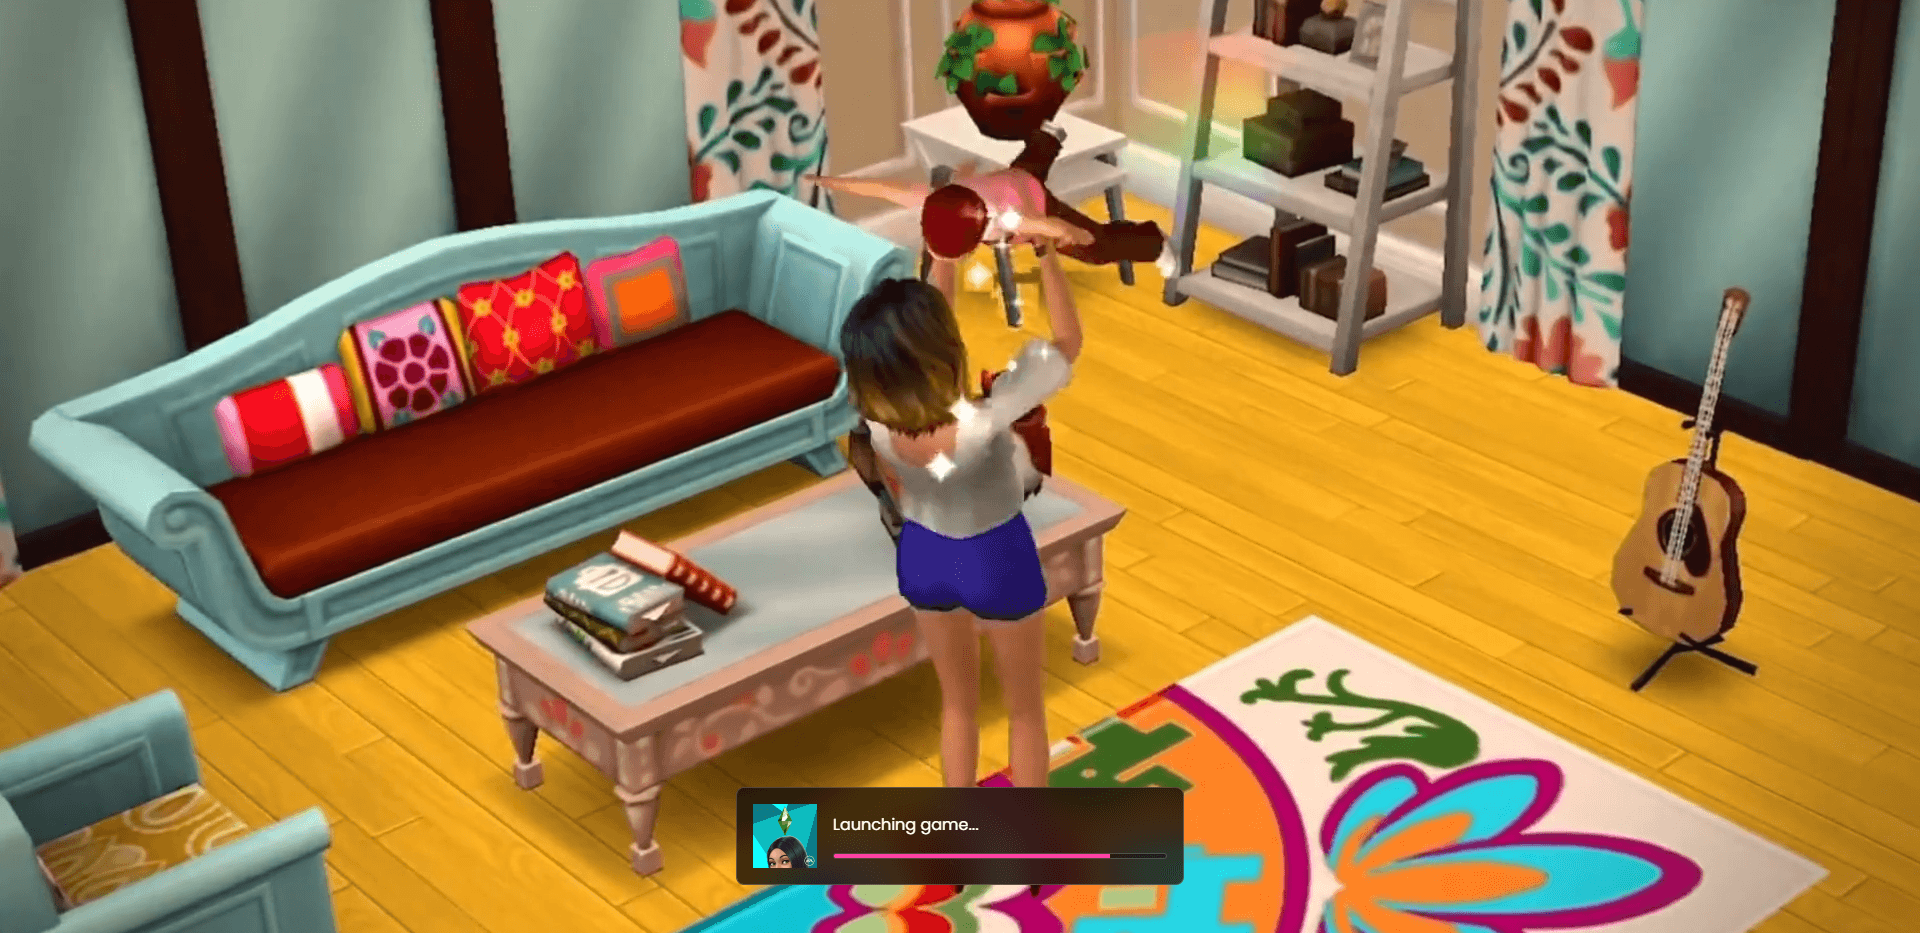 Play The Sims Mobile on InstaPlay: Create, Customize, and Connect with Others in the Virtual World